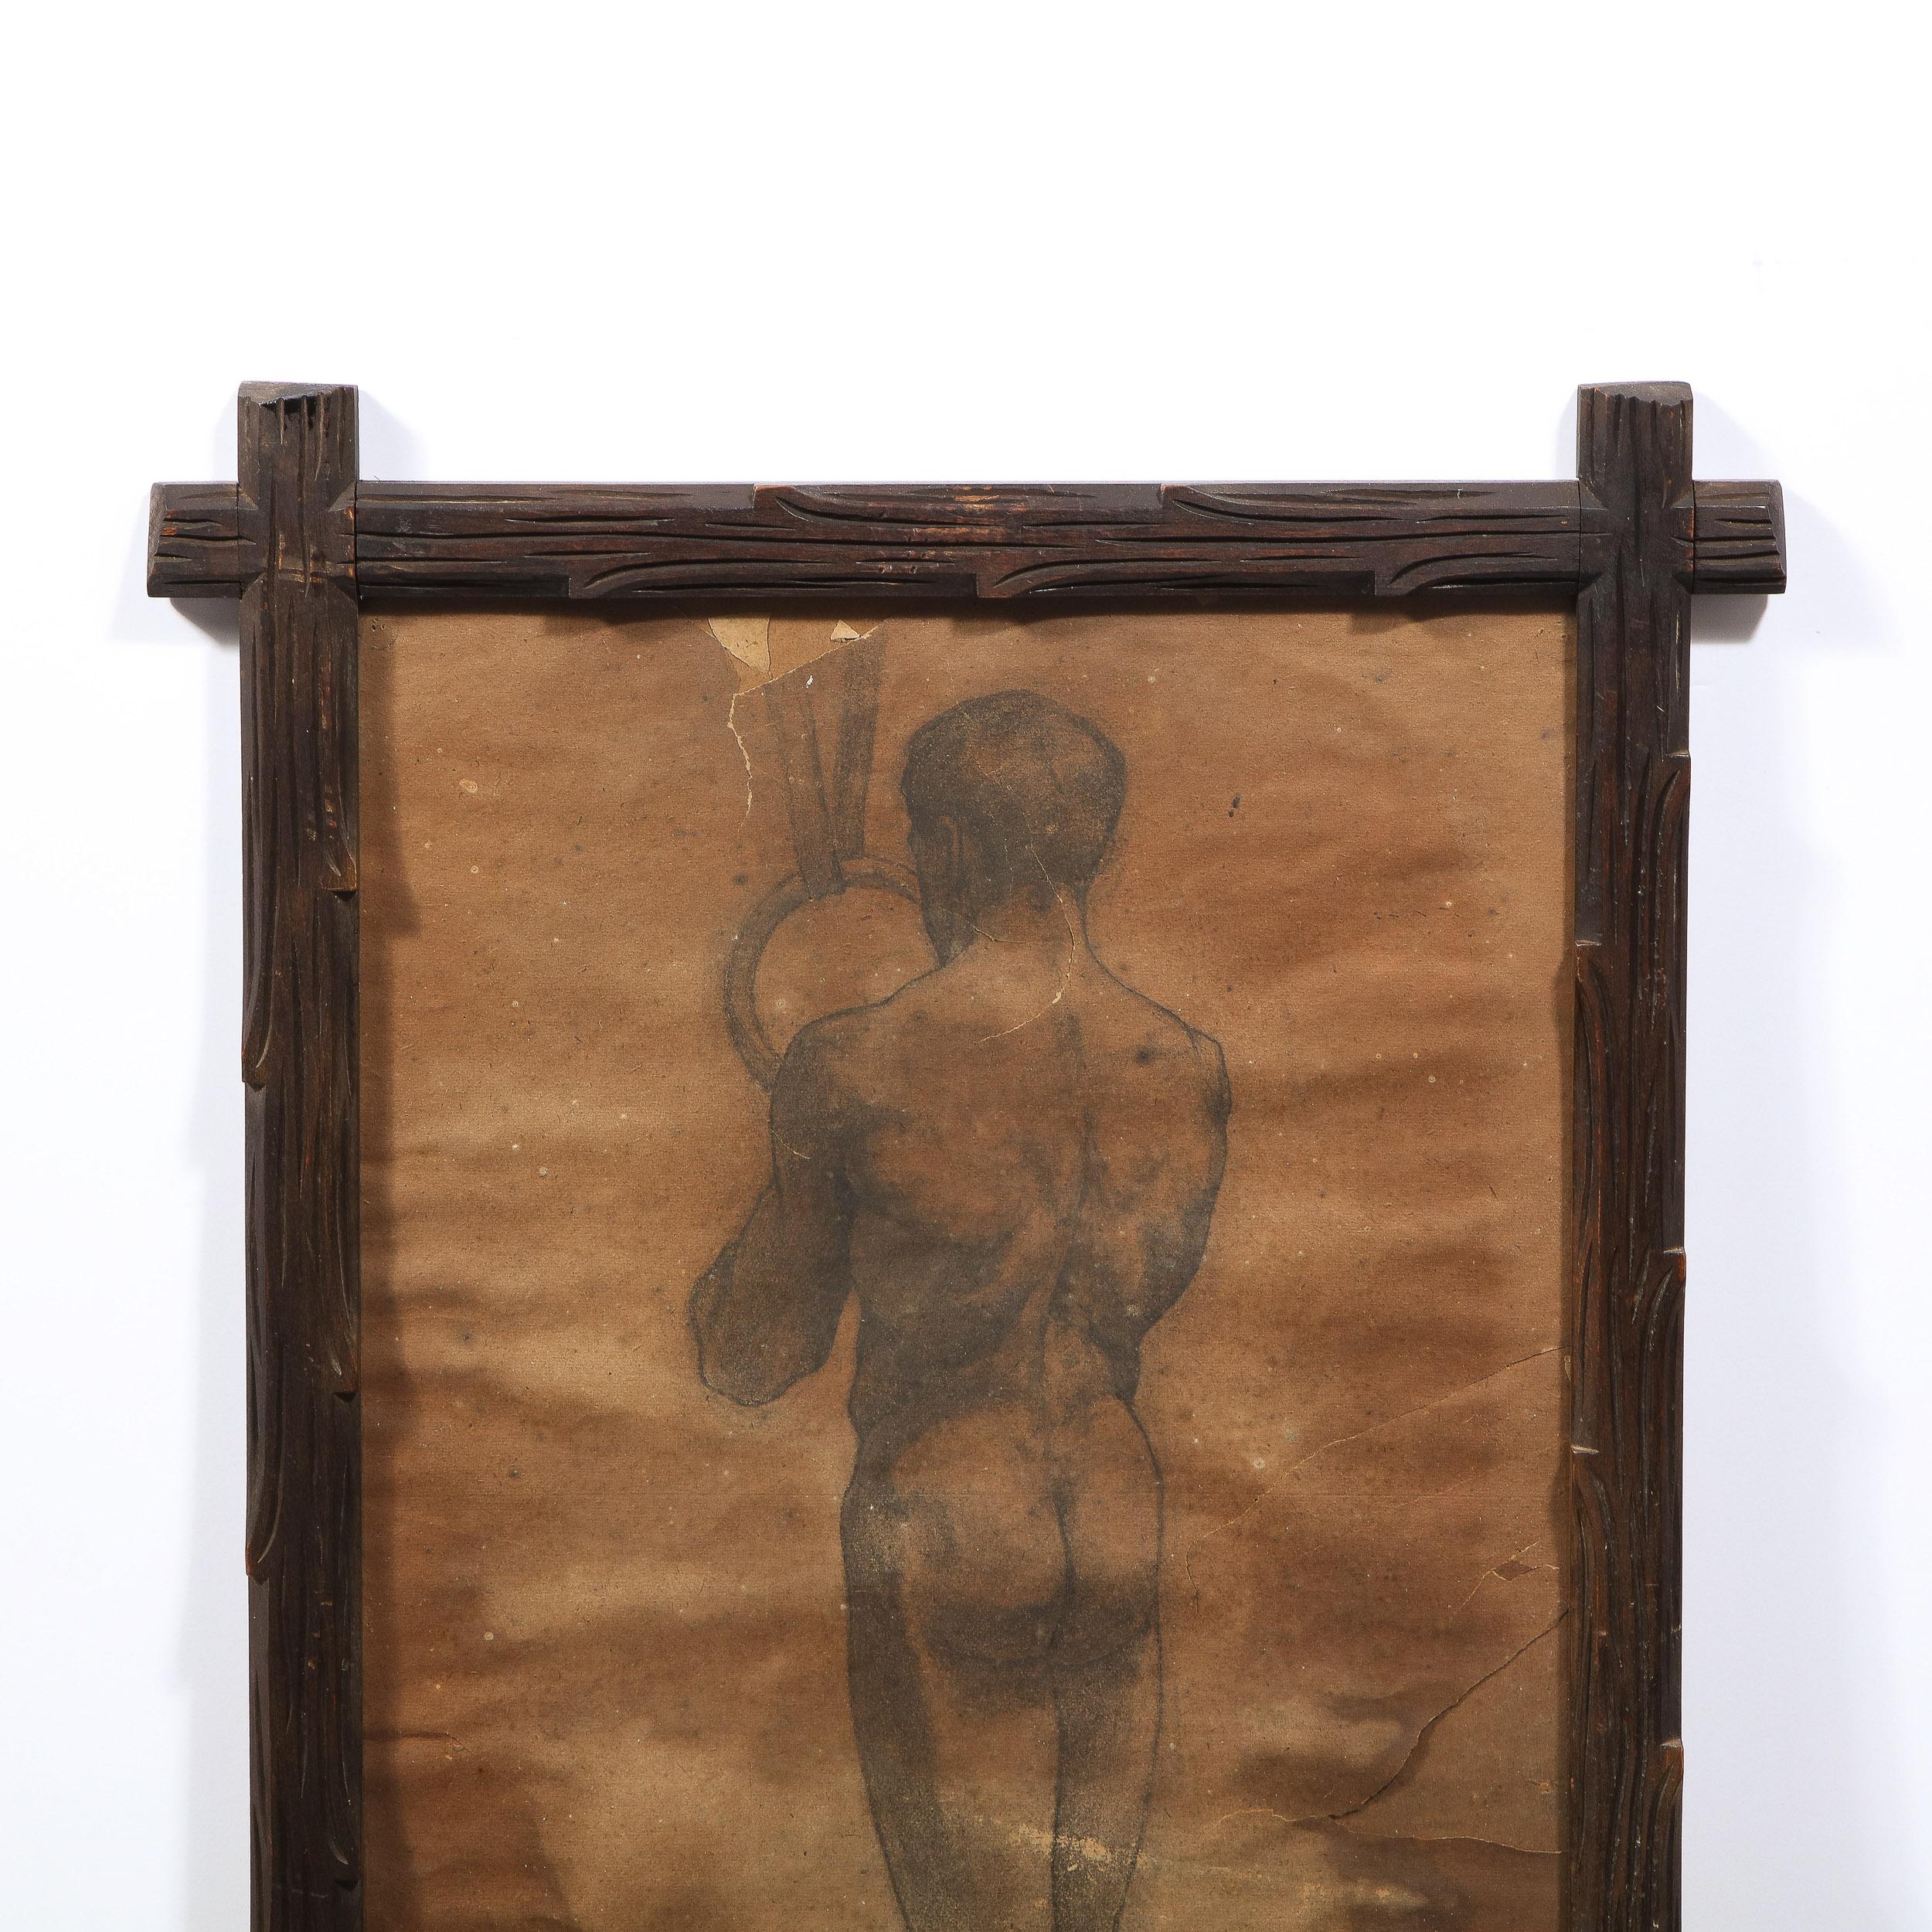 Untitled Nude Male Diptych, Charcoal/ Graphite on Parchment by Henrik Kóbor  3